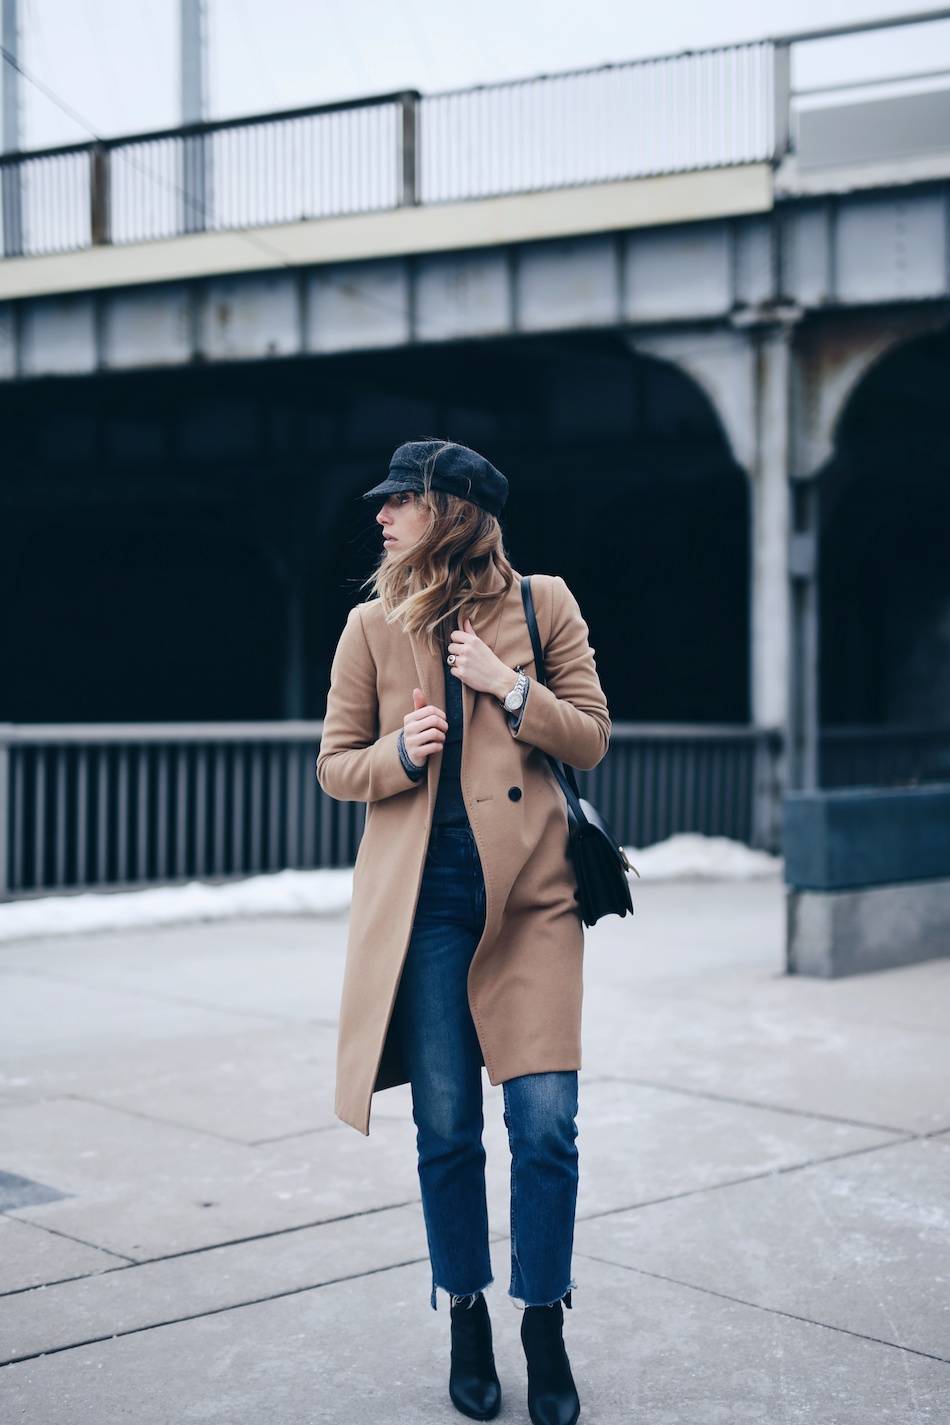 Style and beauty blogger Jill Lansky of The August Diaries Isabel marant Eva newsboy cap, camel coat, jeans, how to dress like a Parisian, tag heuer watch